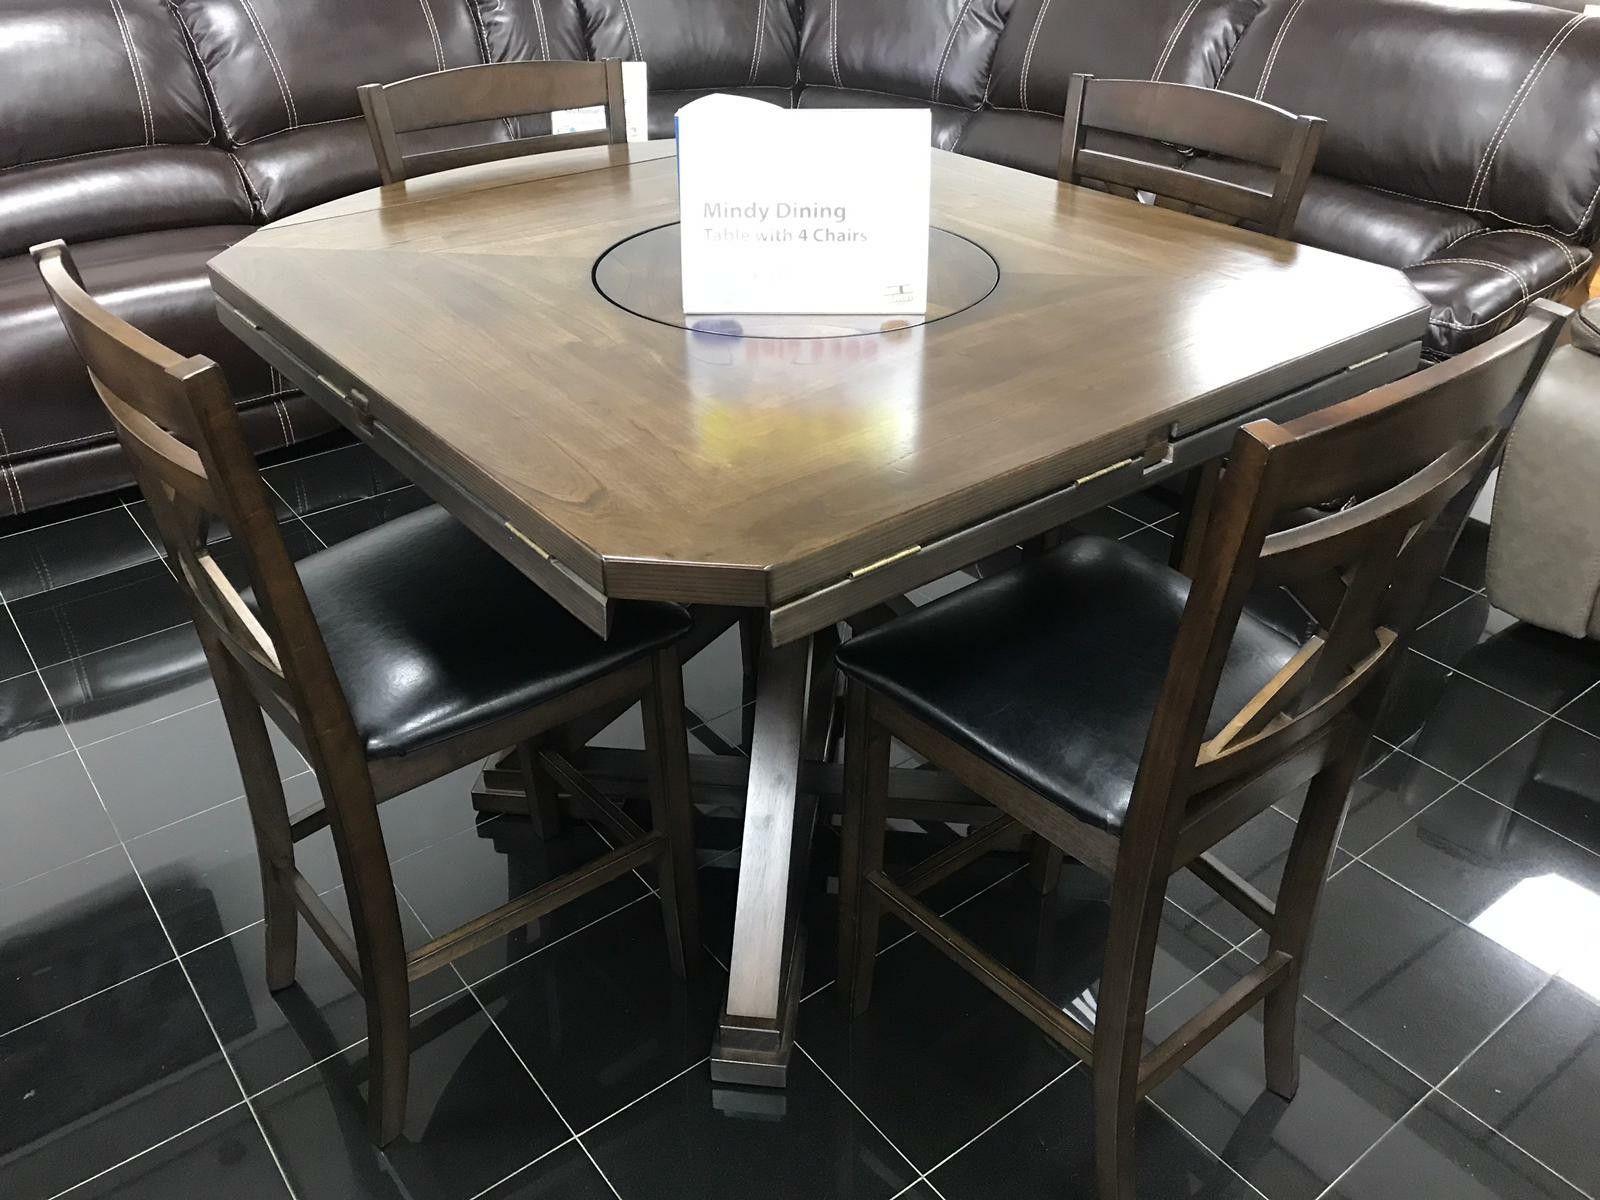 Mindy Brown Dining Table with 4 Chairs ONLY $399. NO CREDIT CHECK FINANCING